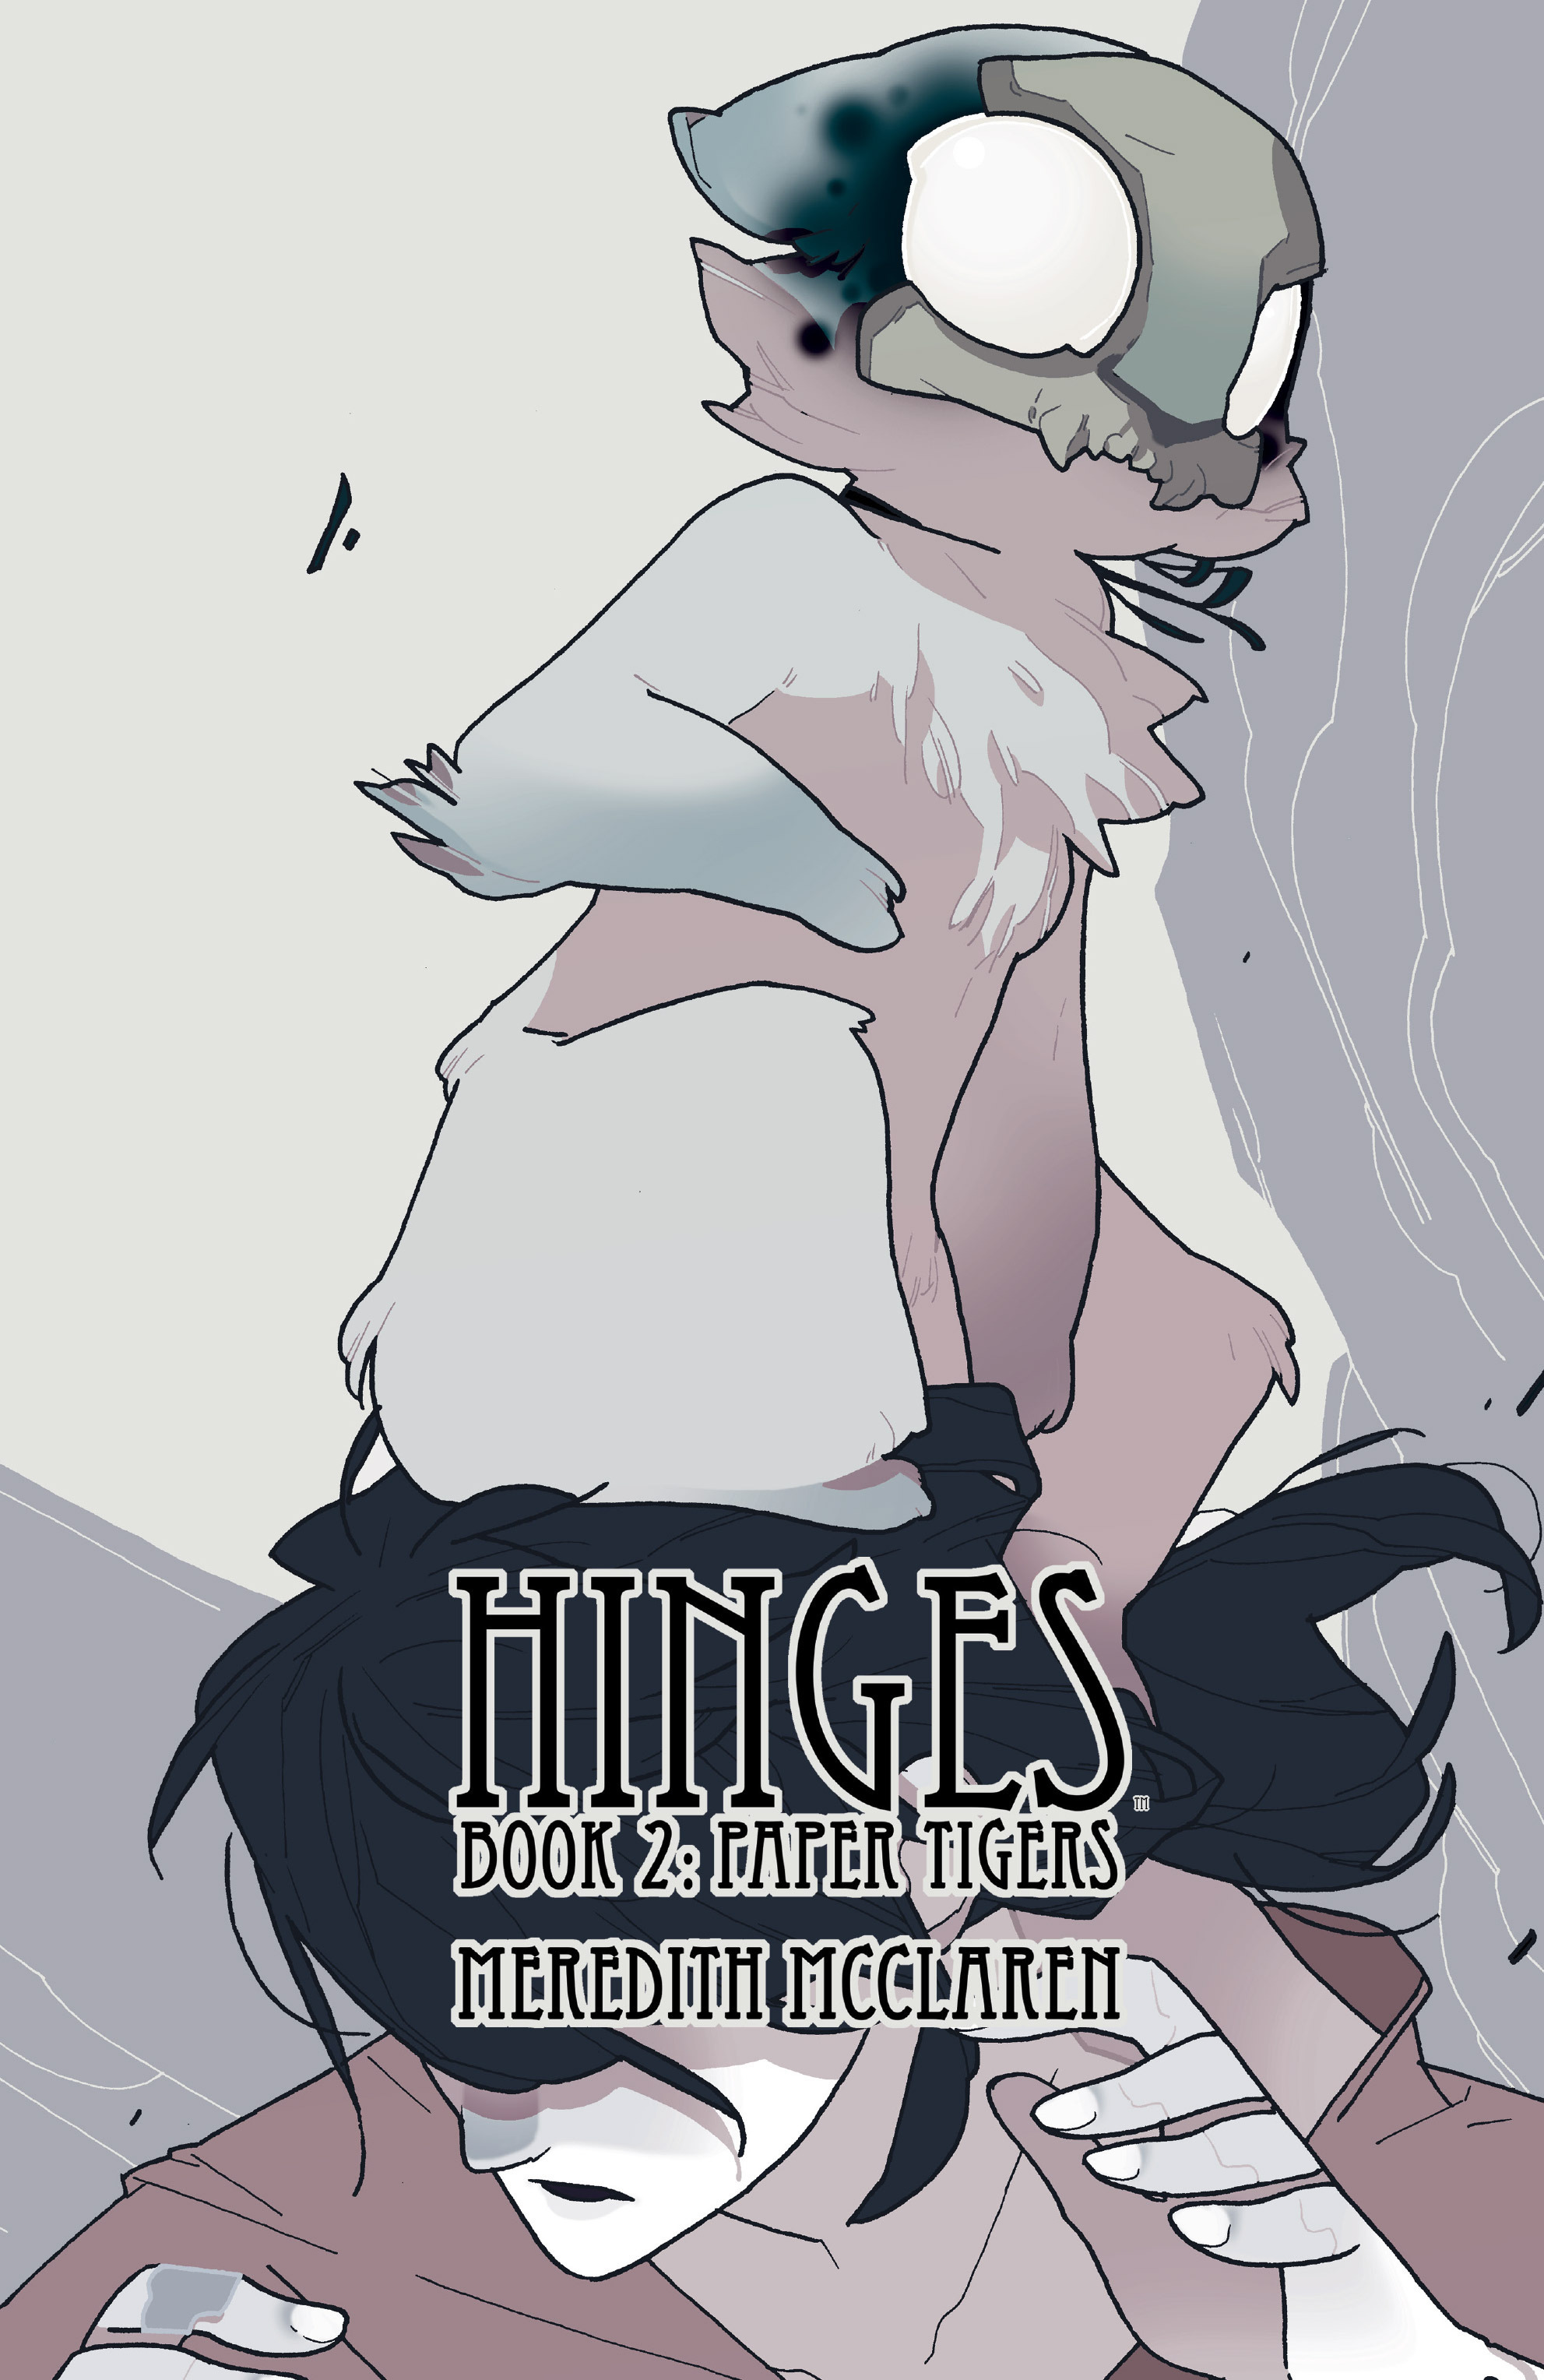 Read online Hinges: Paper Tigers comic -  Issue # TPB - 1